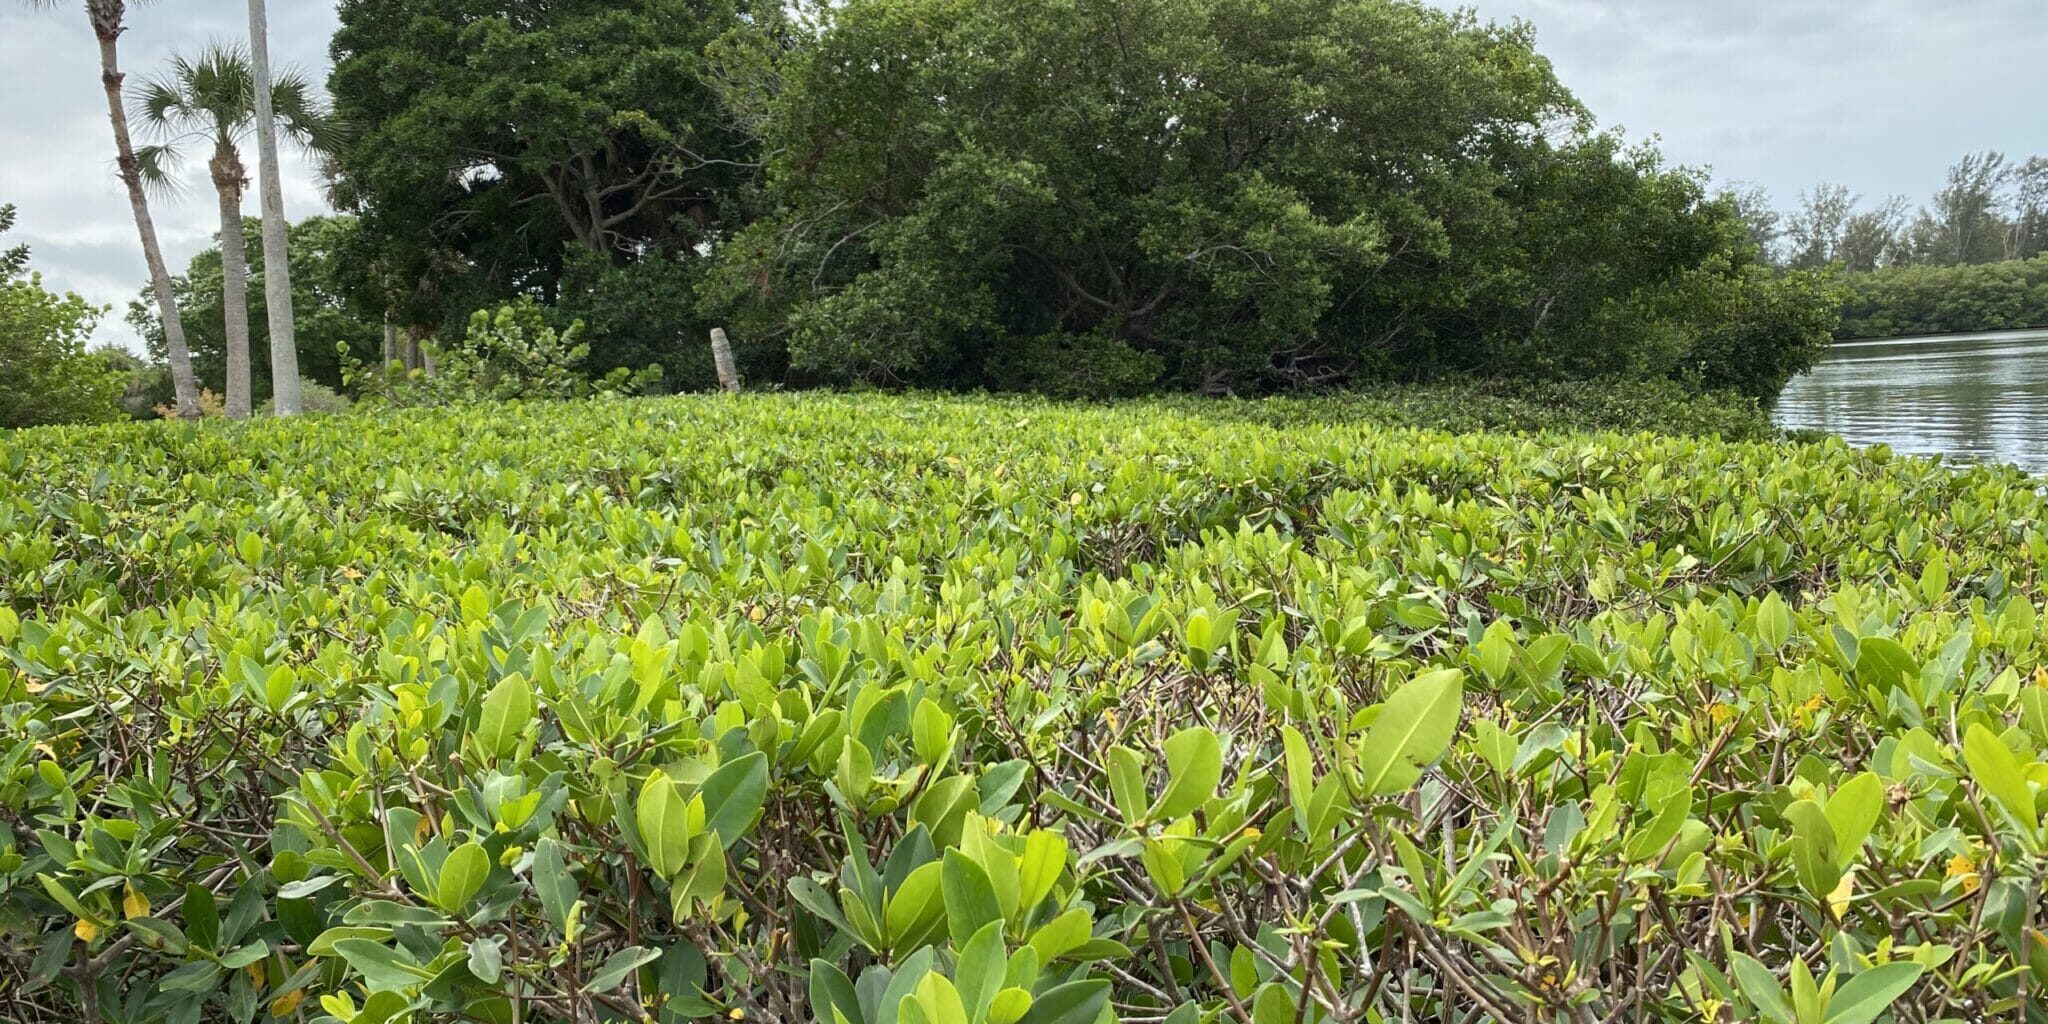 You Can Legally and Safely Trim Mangroves – But Should You?